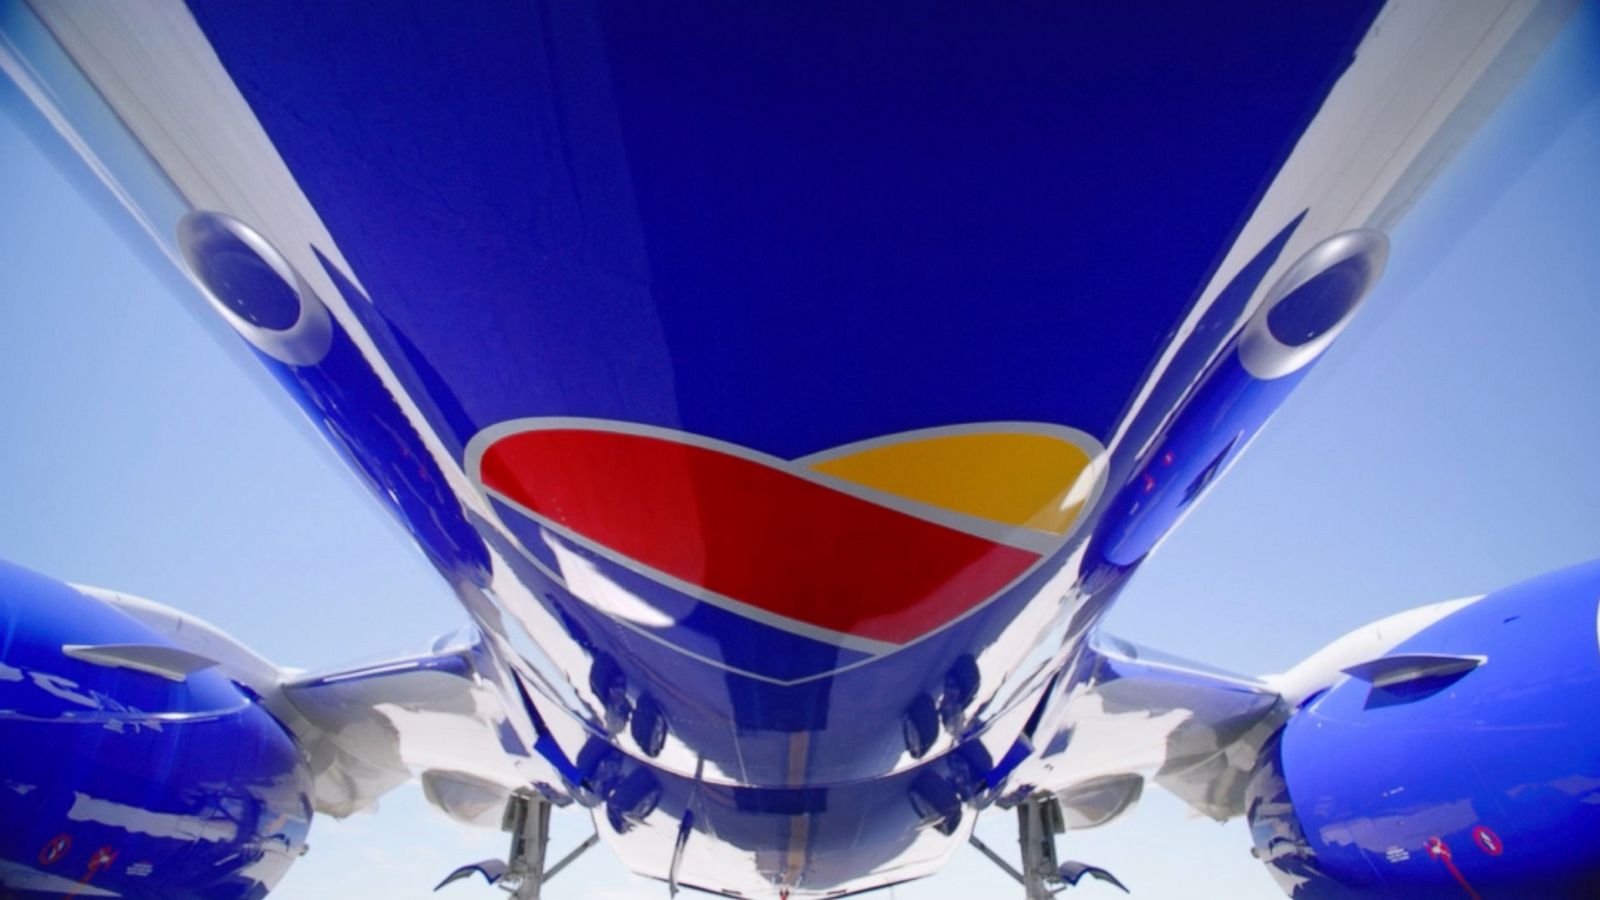 Southwest Airlines Jpg Background Southwest Airplane Pictures Background  Image And Wallpaper for Free Download